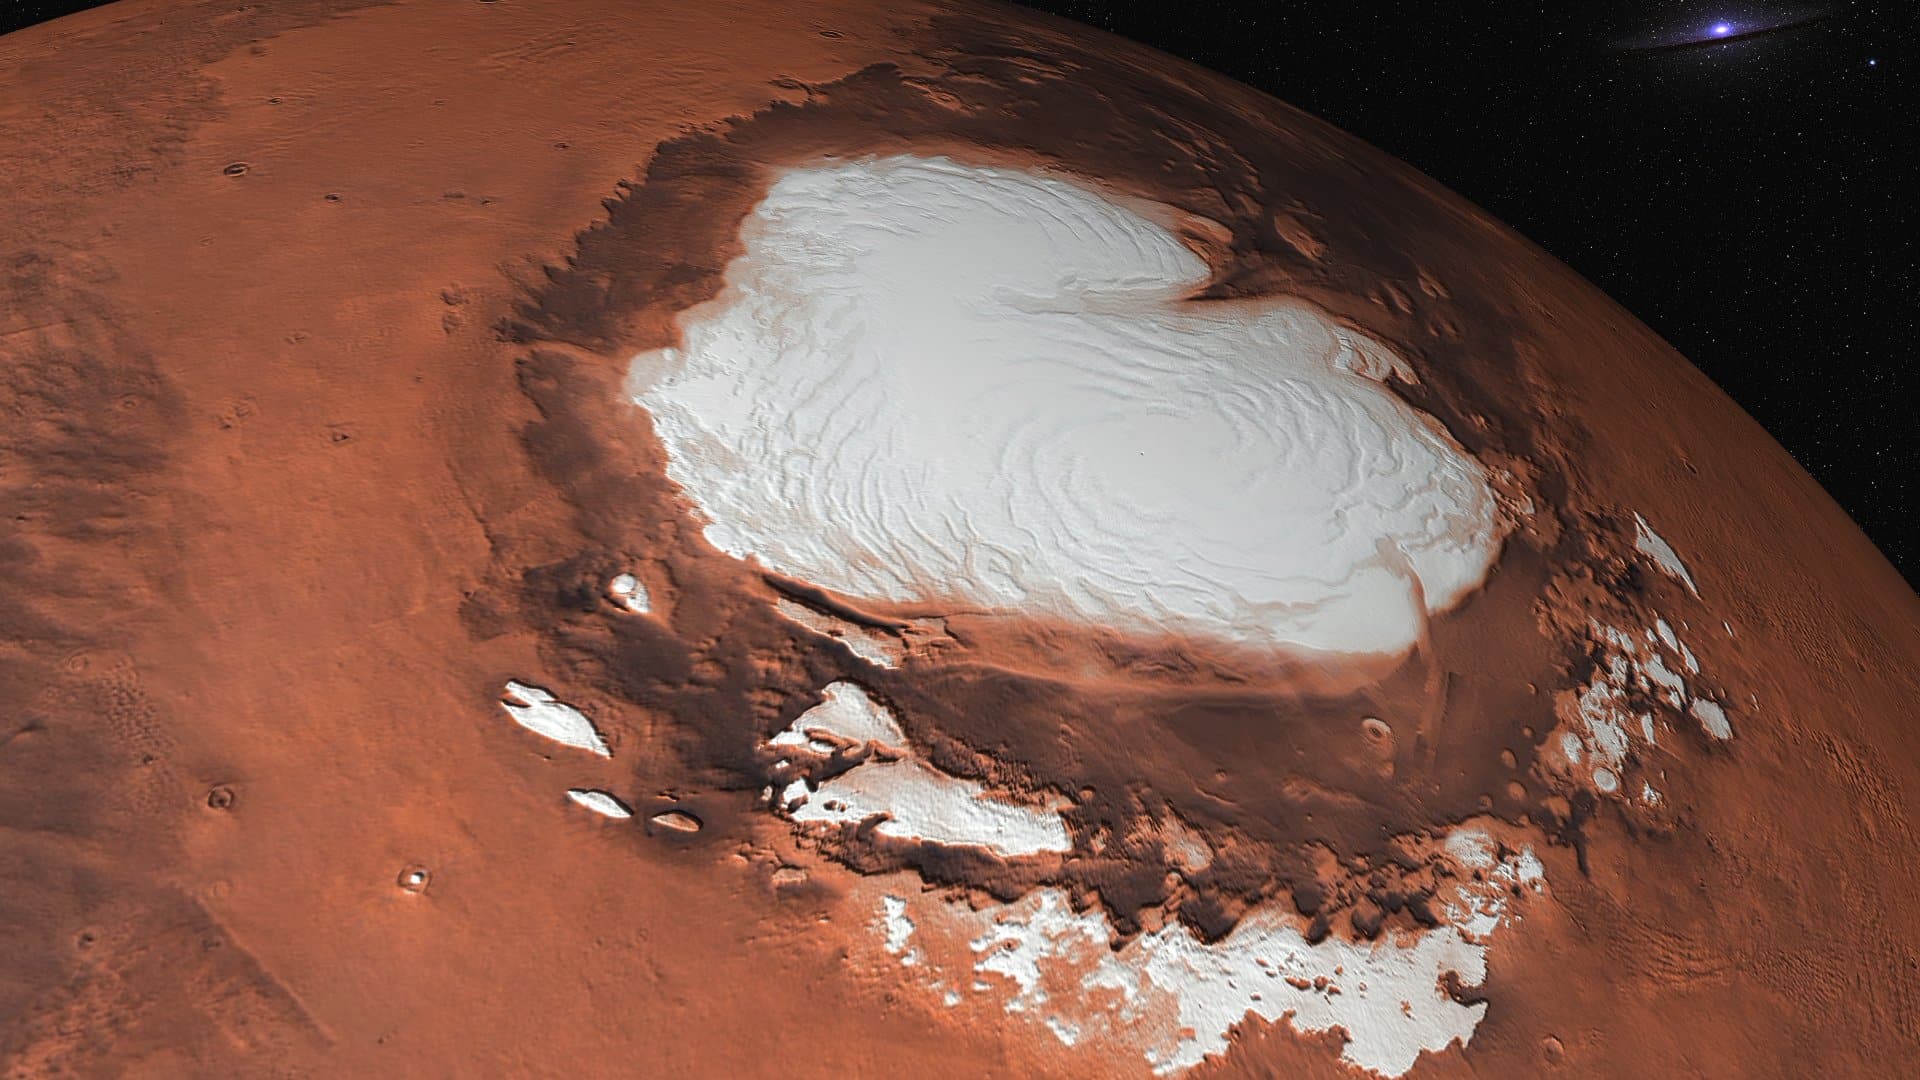 Photo of the surface of Mars suggesting the presence of water.